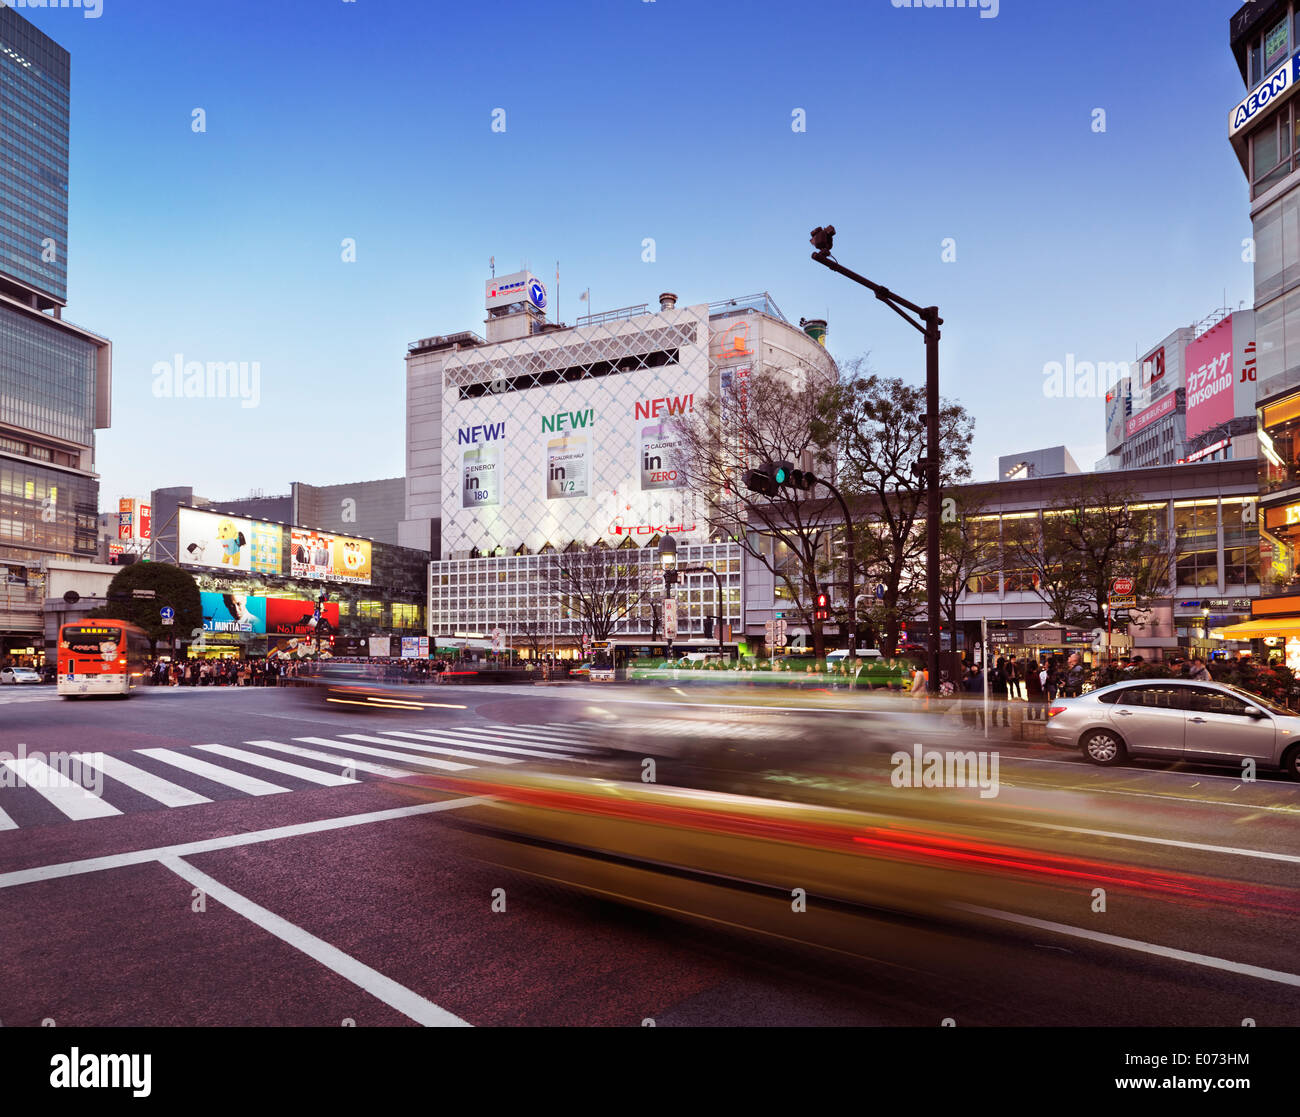 Blurred taxi cab in front of Tokyu building and Shibuya station in Tokyo, Japan Stock Photo